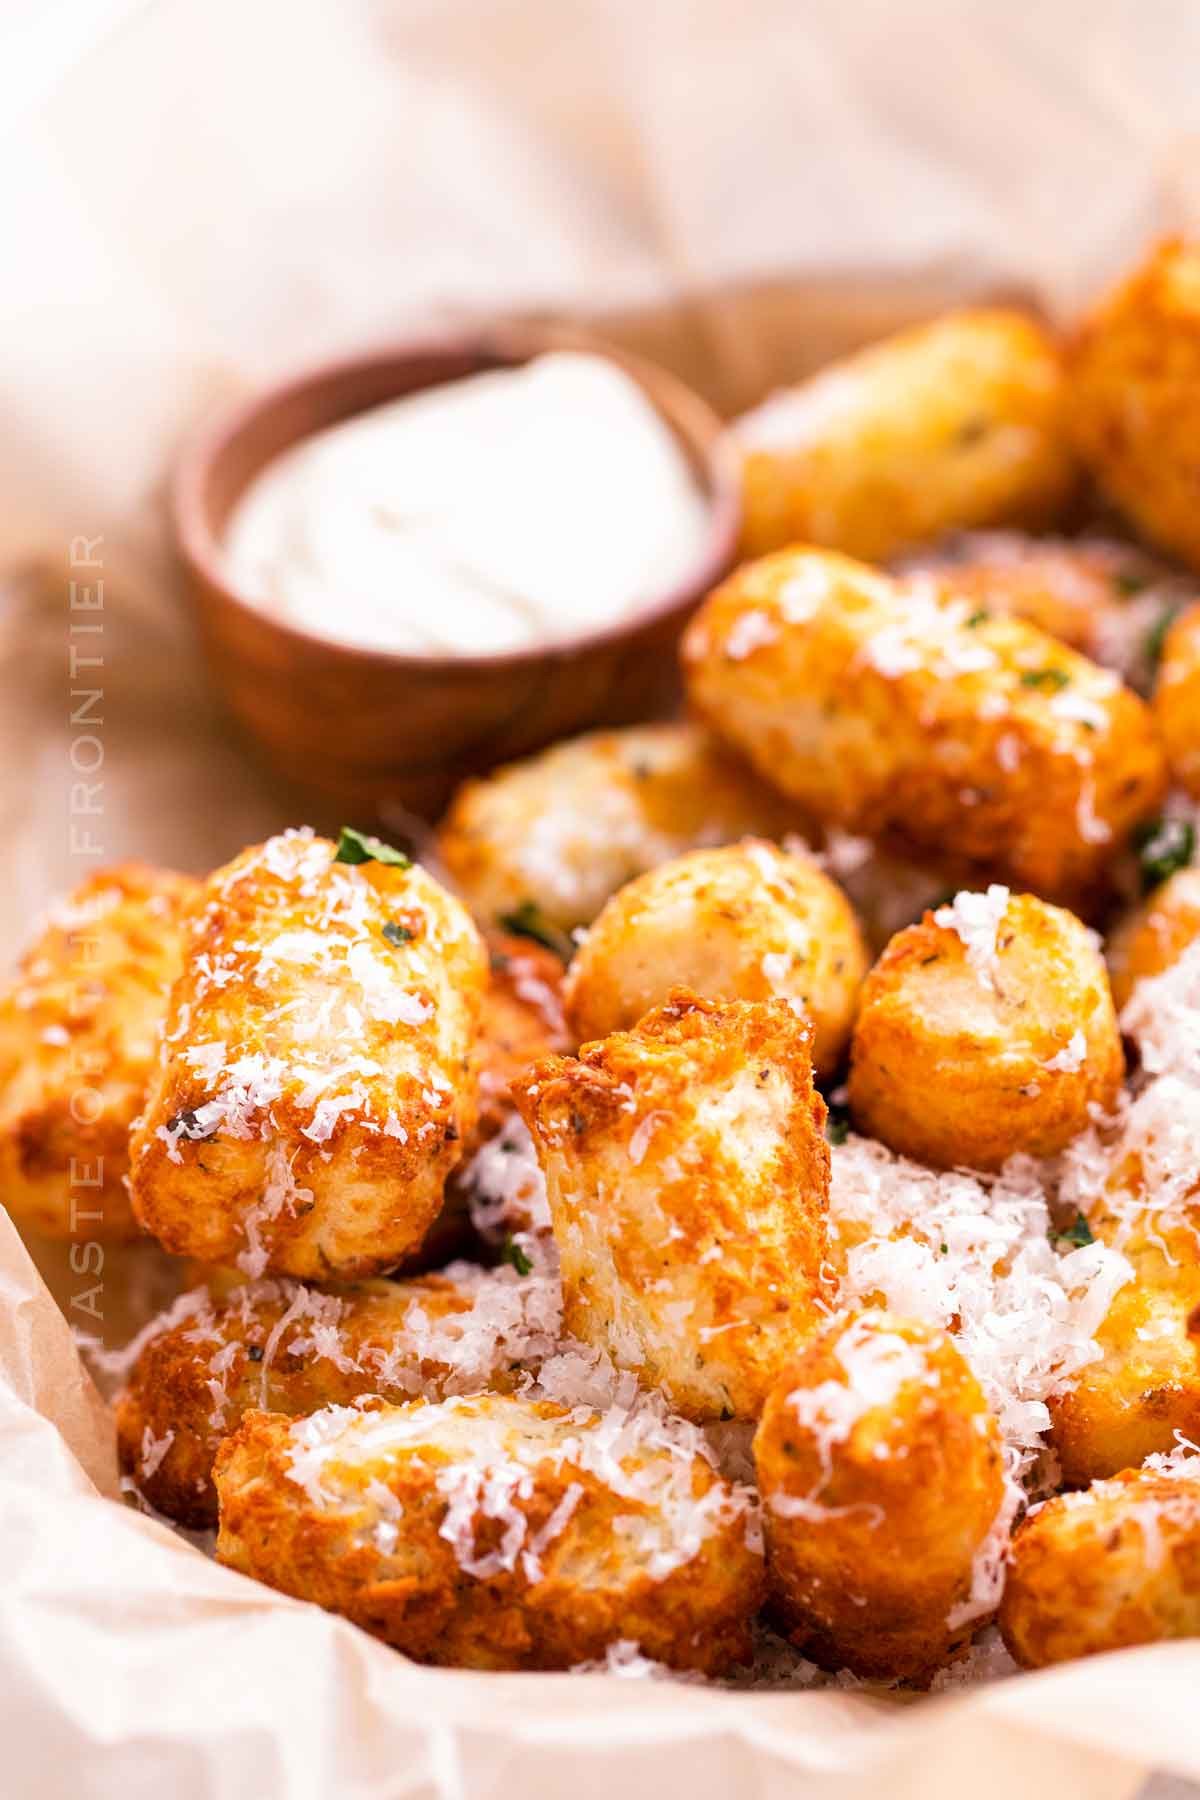 tater tots in air fryer